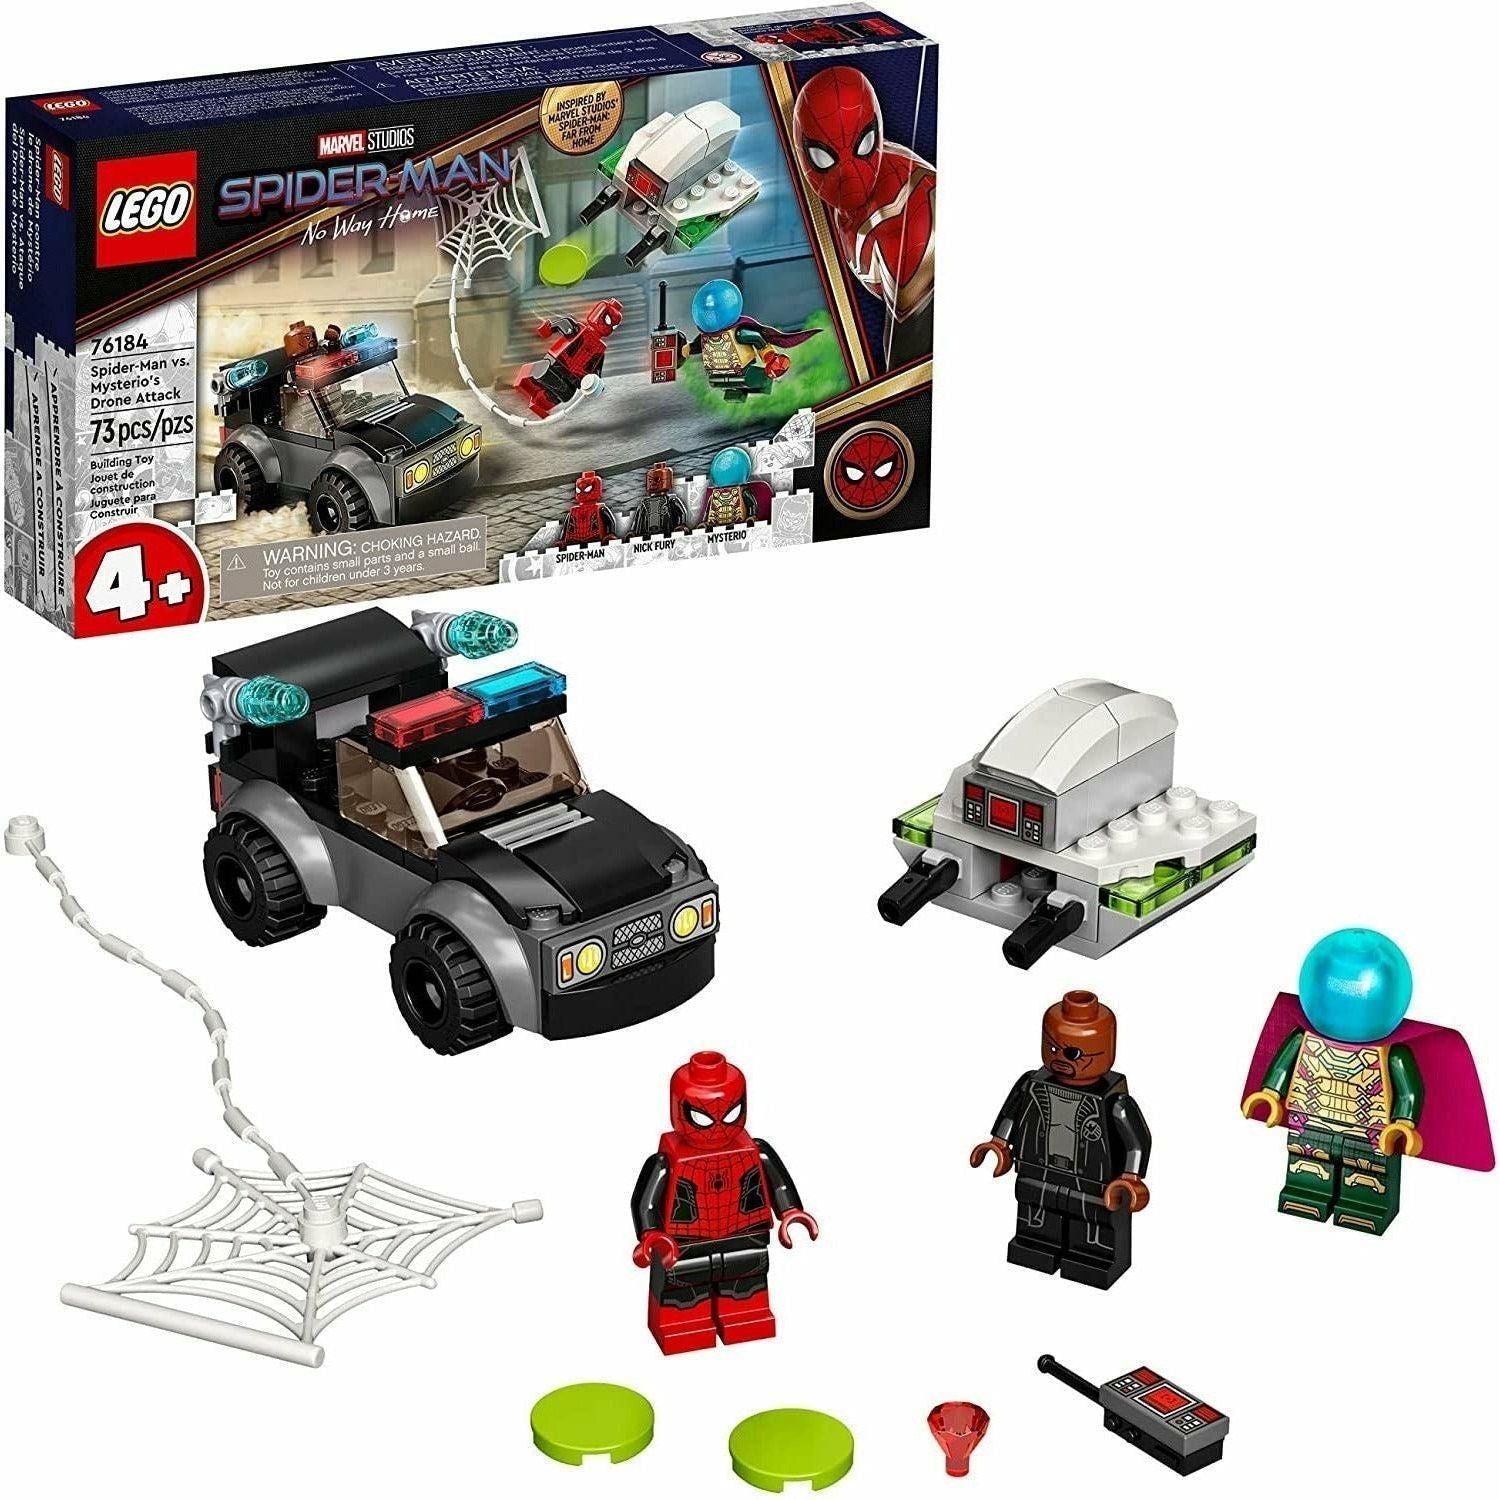 LEGO Marvel Spider-Man vs. Mysterio’s Drone Attack 76184 Building Kit (73 Pieces) - BumbleToys - 5-7 Years, Boys, LEGO, Marvel, OXE, Pre-Order, Spider man, Spiderman